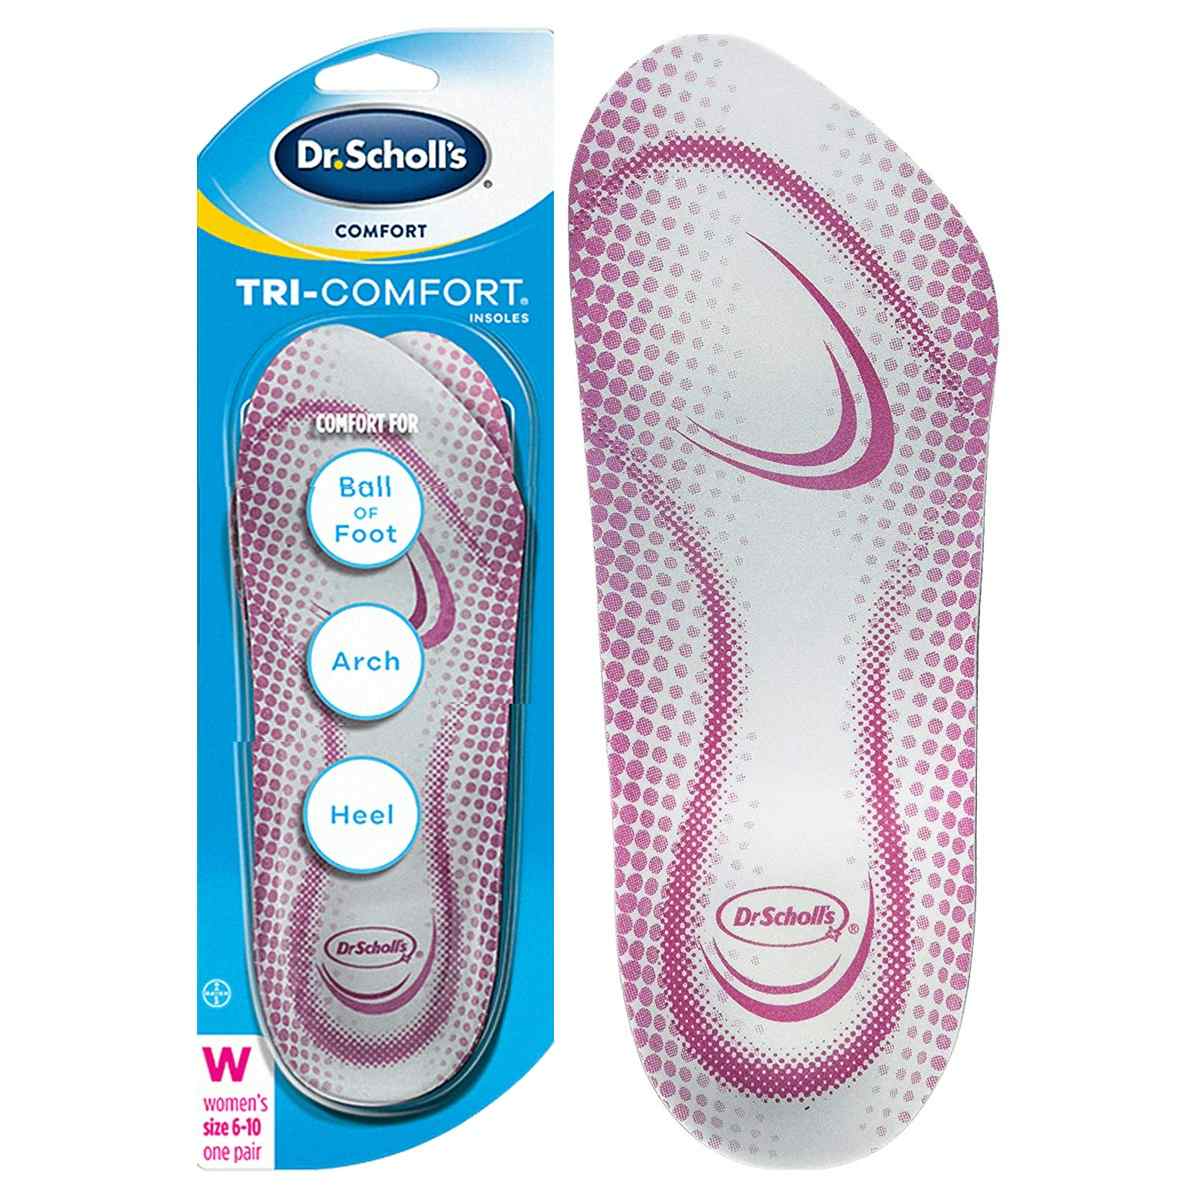 Dr. Scholl's Comfort Tri-Comfort Shoe Insoles, 85284703, Female (Size 6-10) - Pack of 2